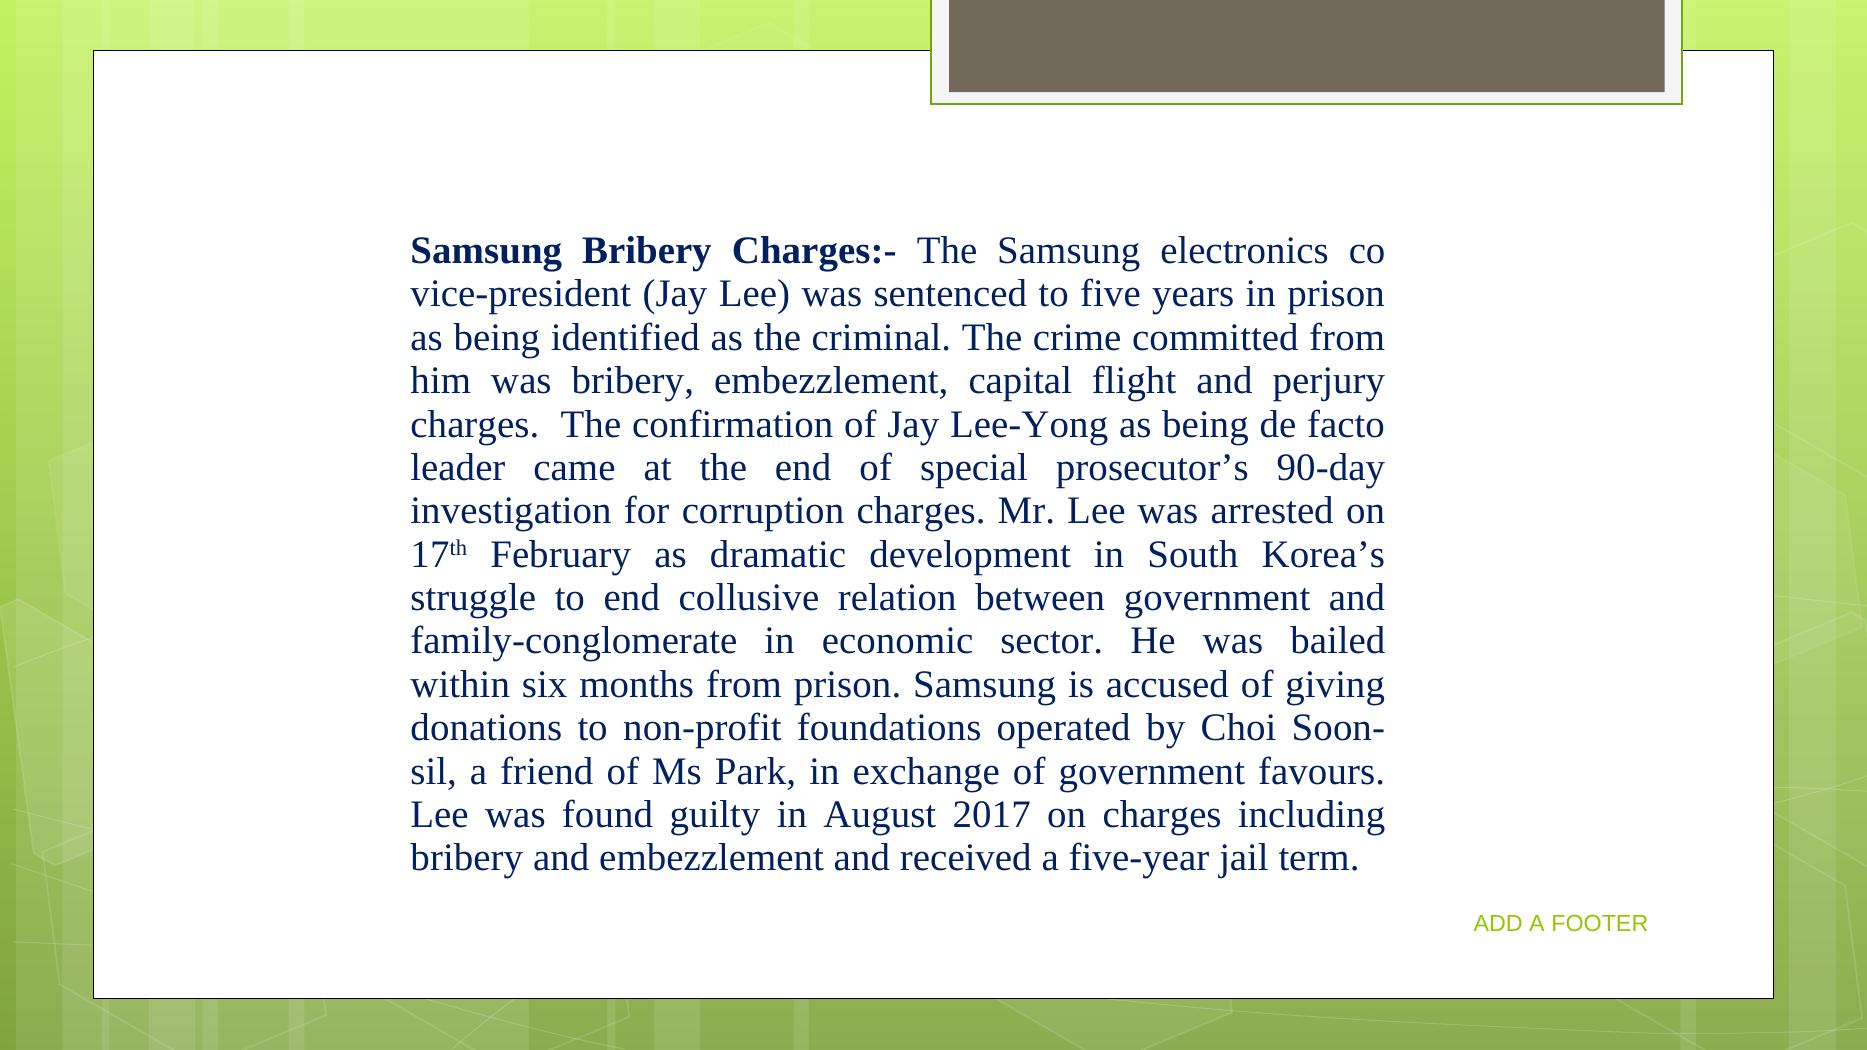 Samsung's Bribery Charges and Corporate Governance: A Business Report_6